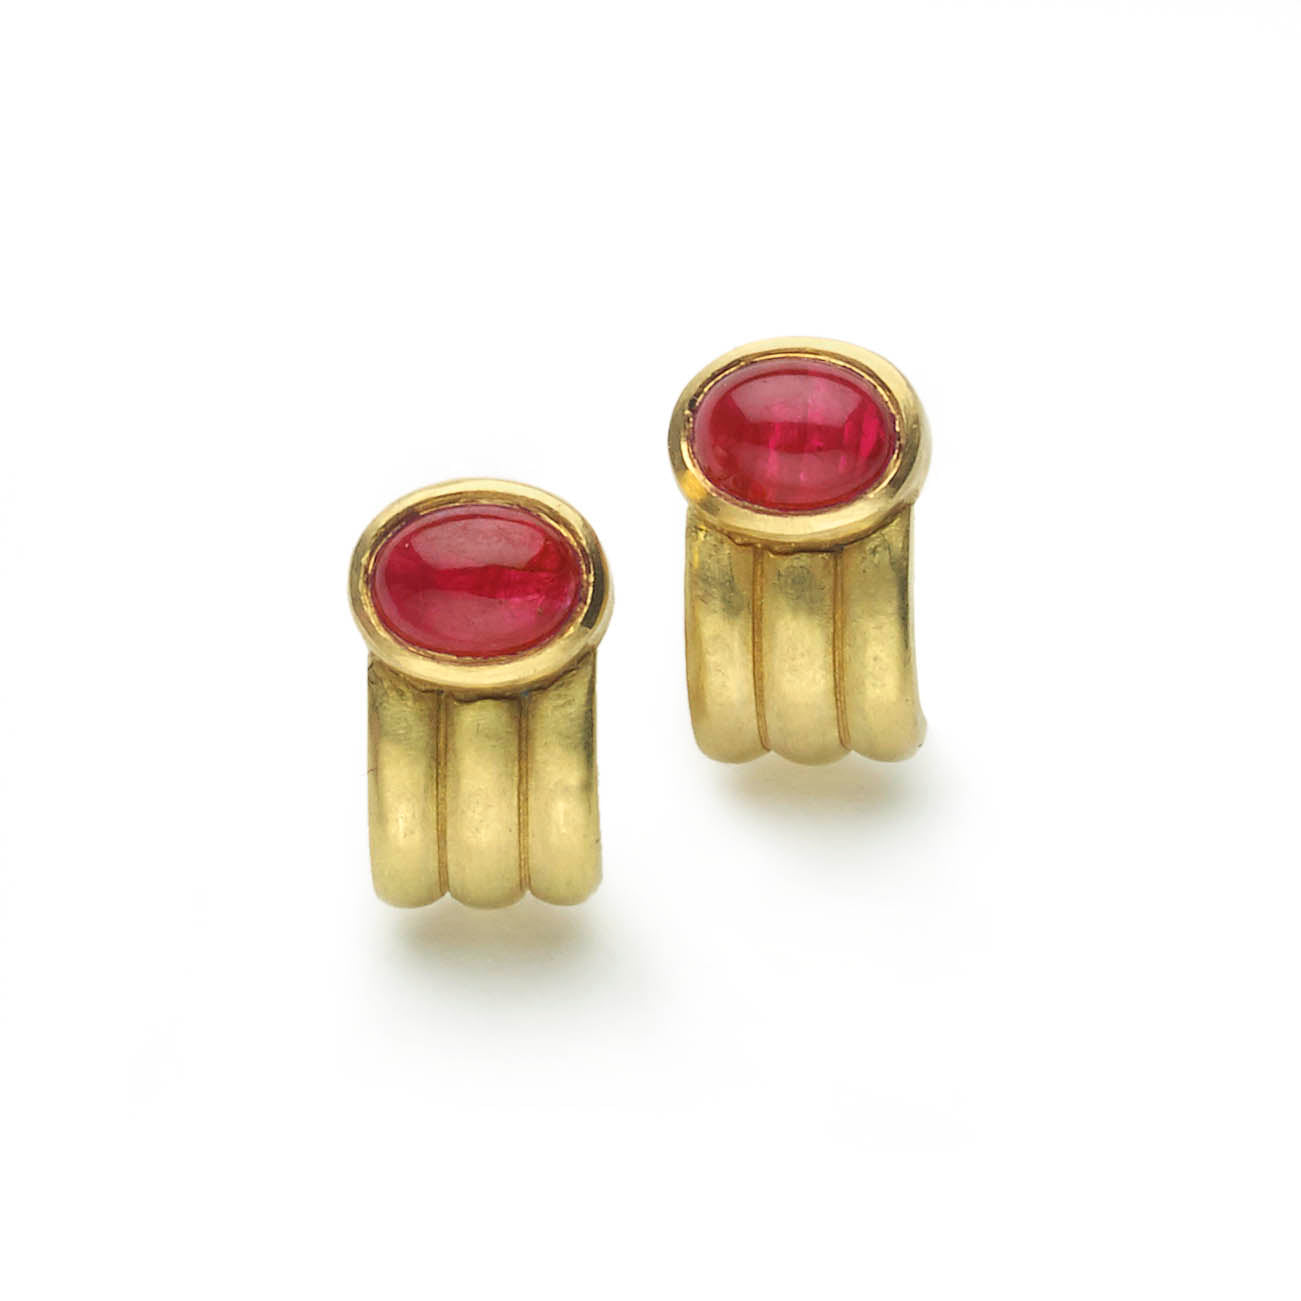 Oval ruby cabochons set in yellow gold ridged 'half hoop' design